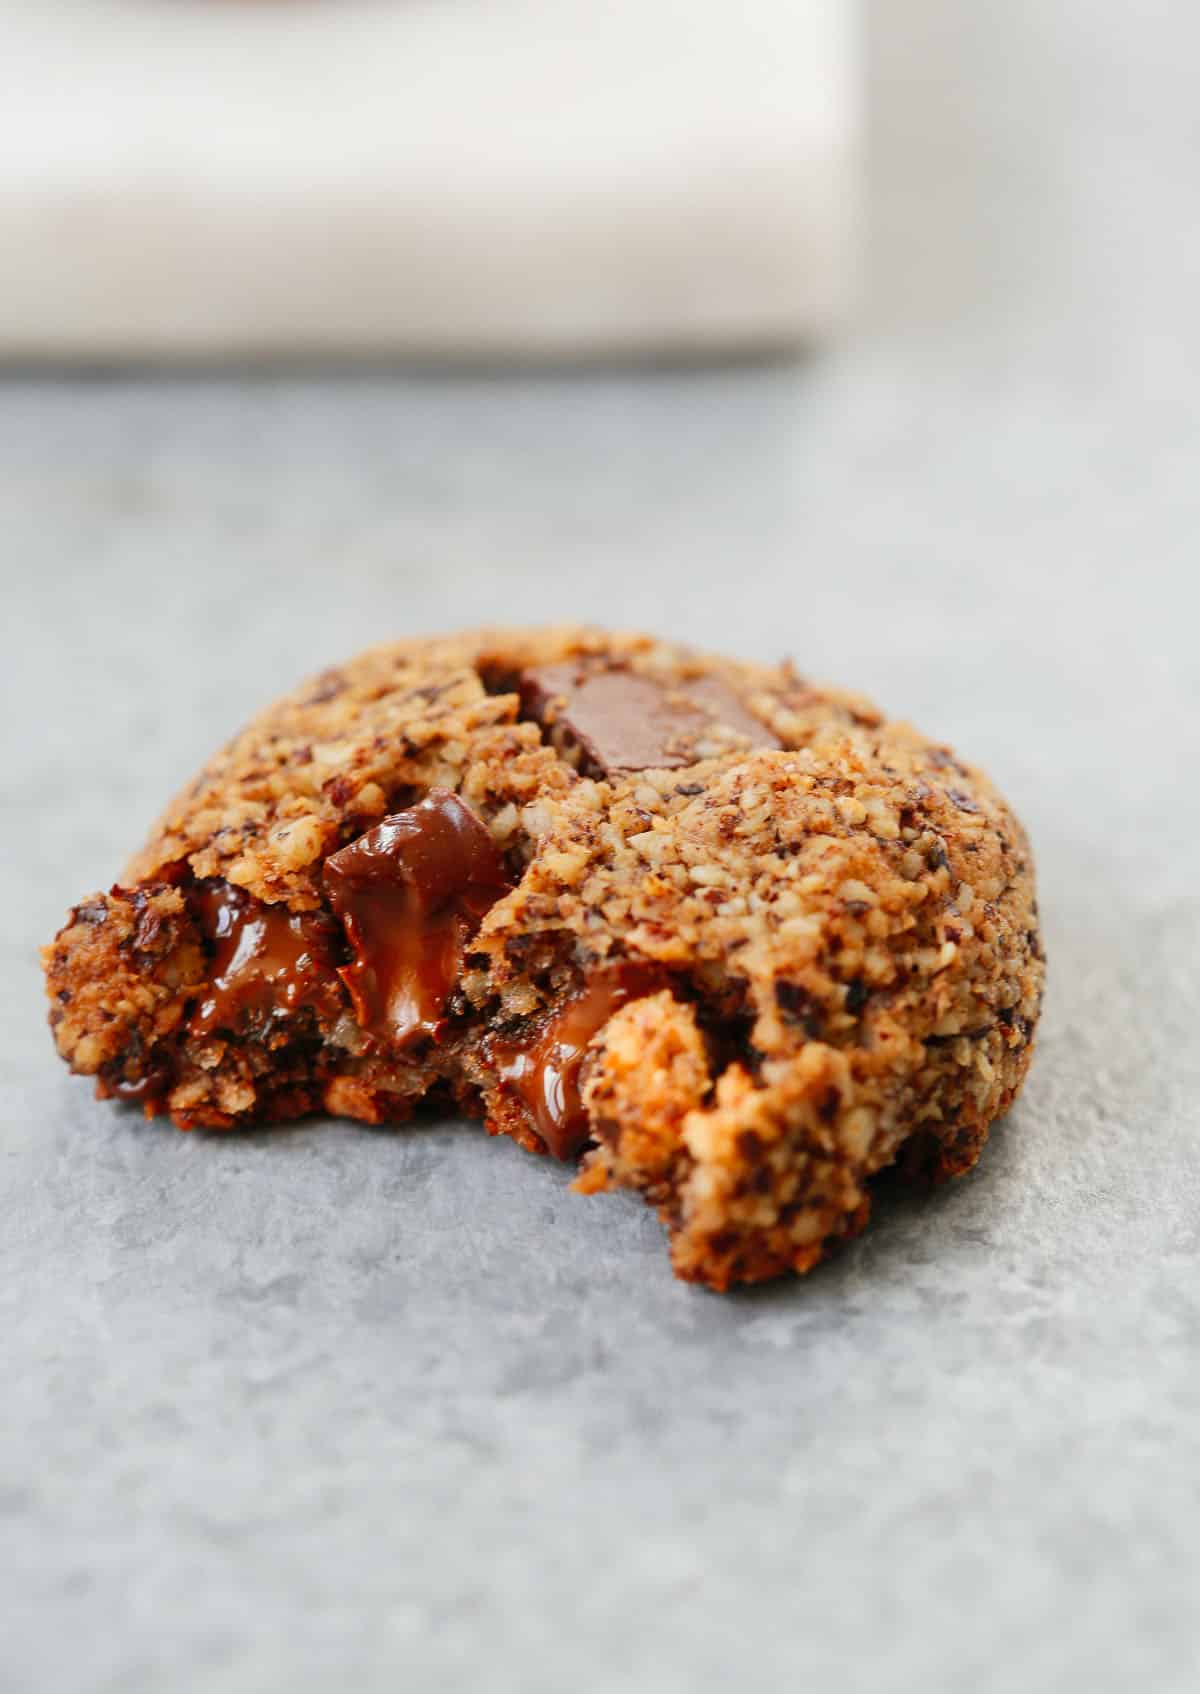 A photo of Chocolate Chunk Hazelnut Cookies with a bite taken out of it.